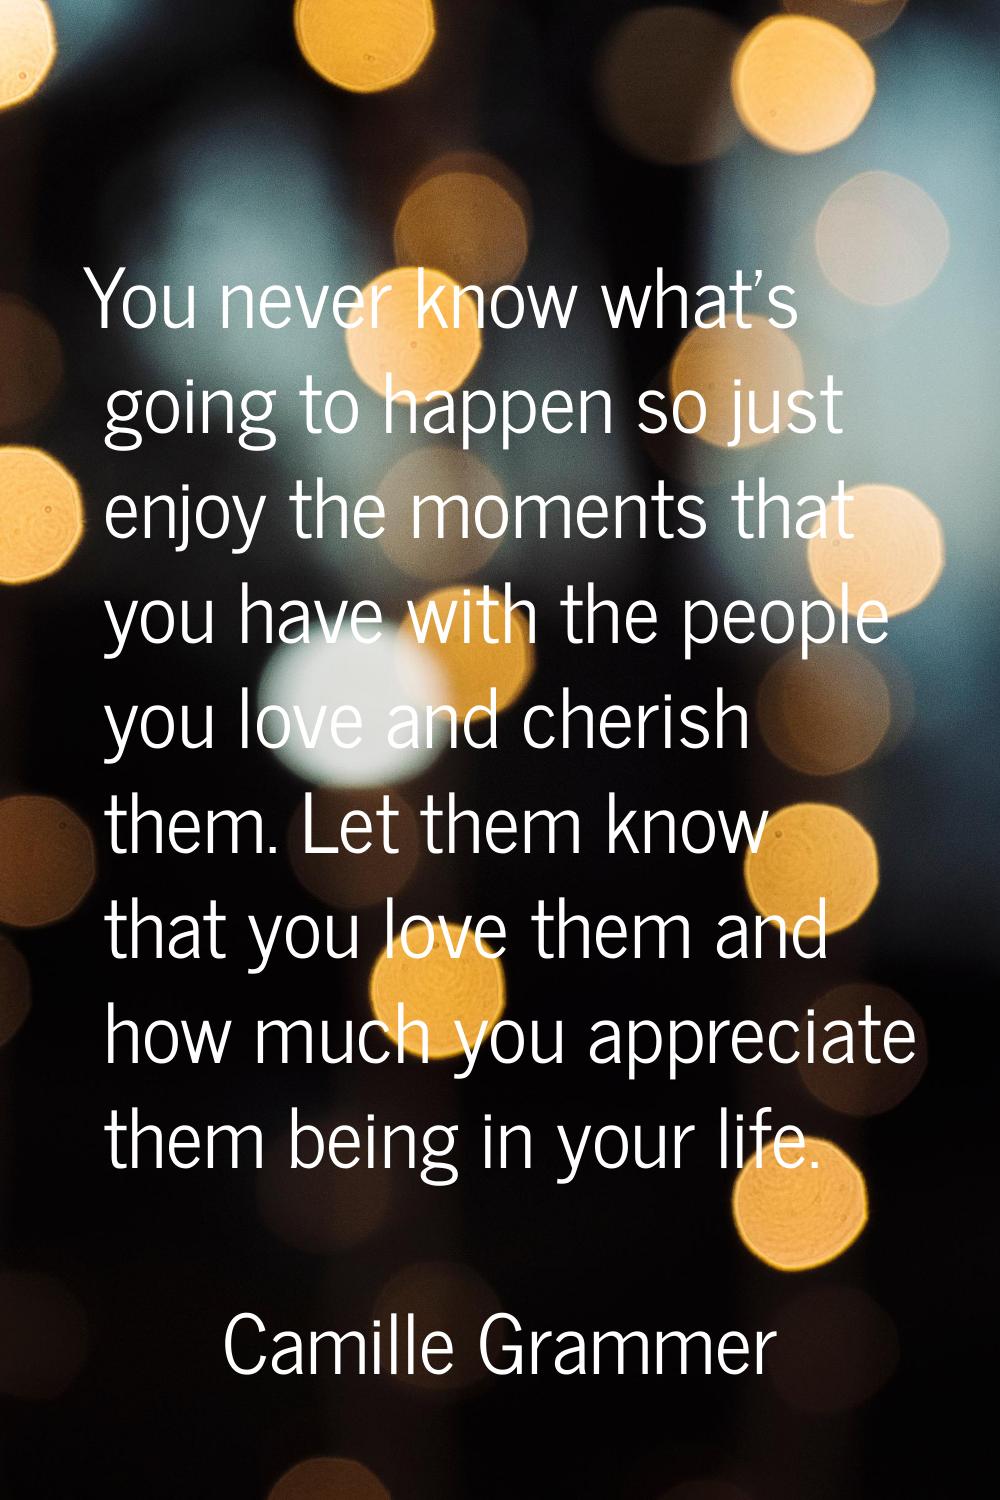 You never know what's going to happen so just enjoy the moments that you have with the people you l